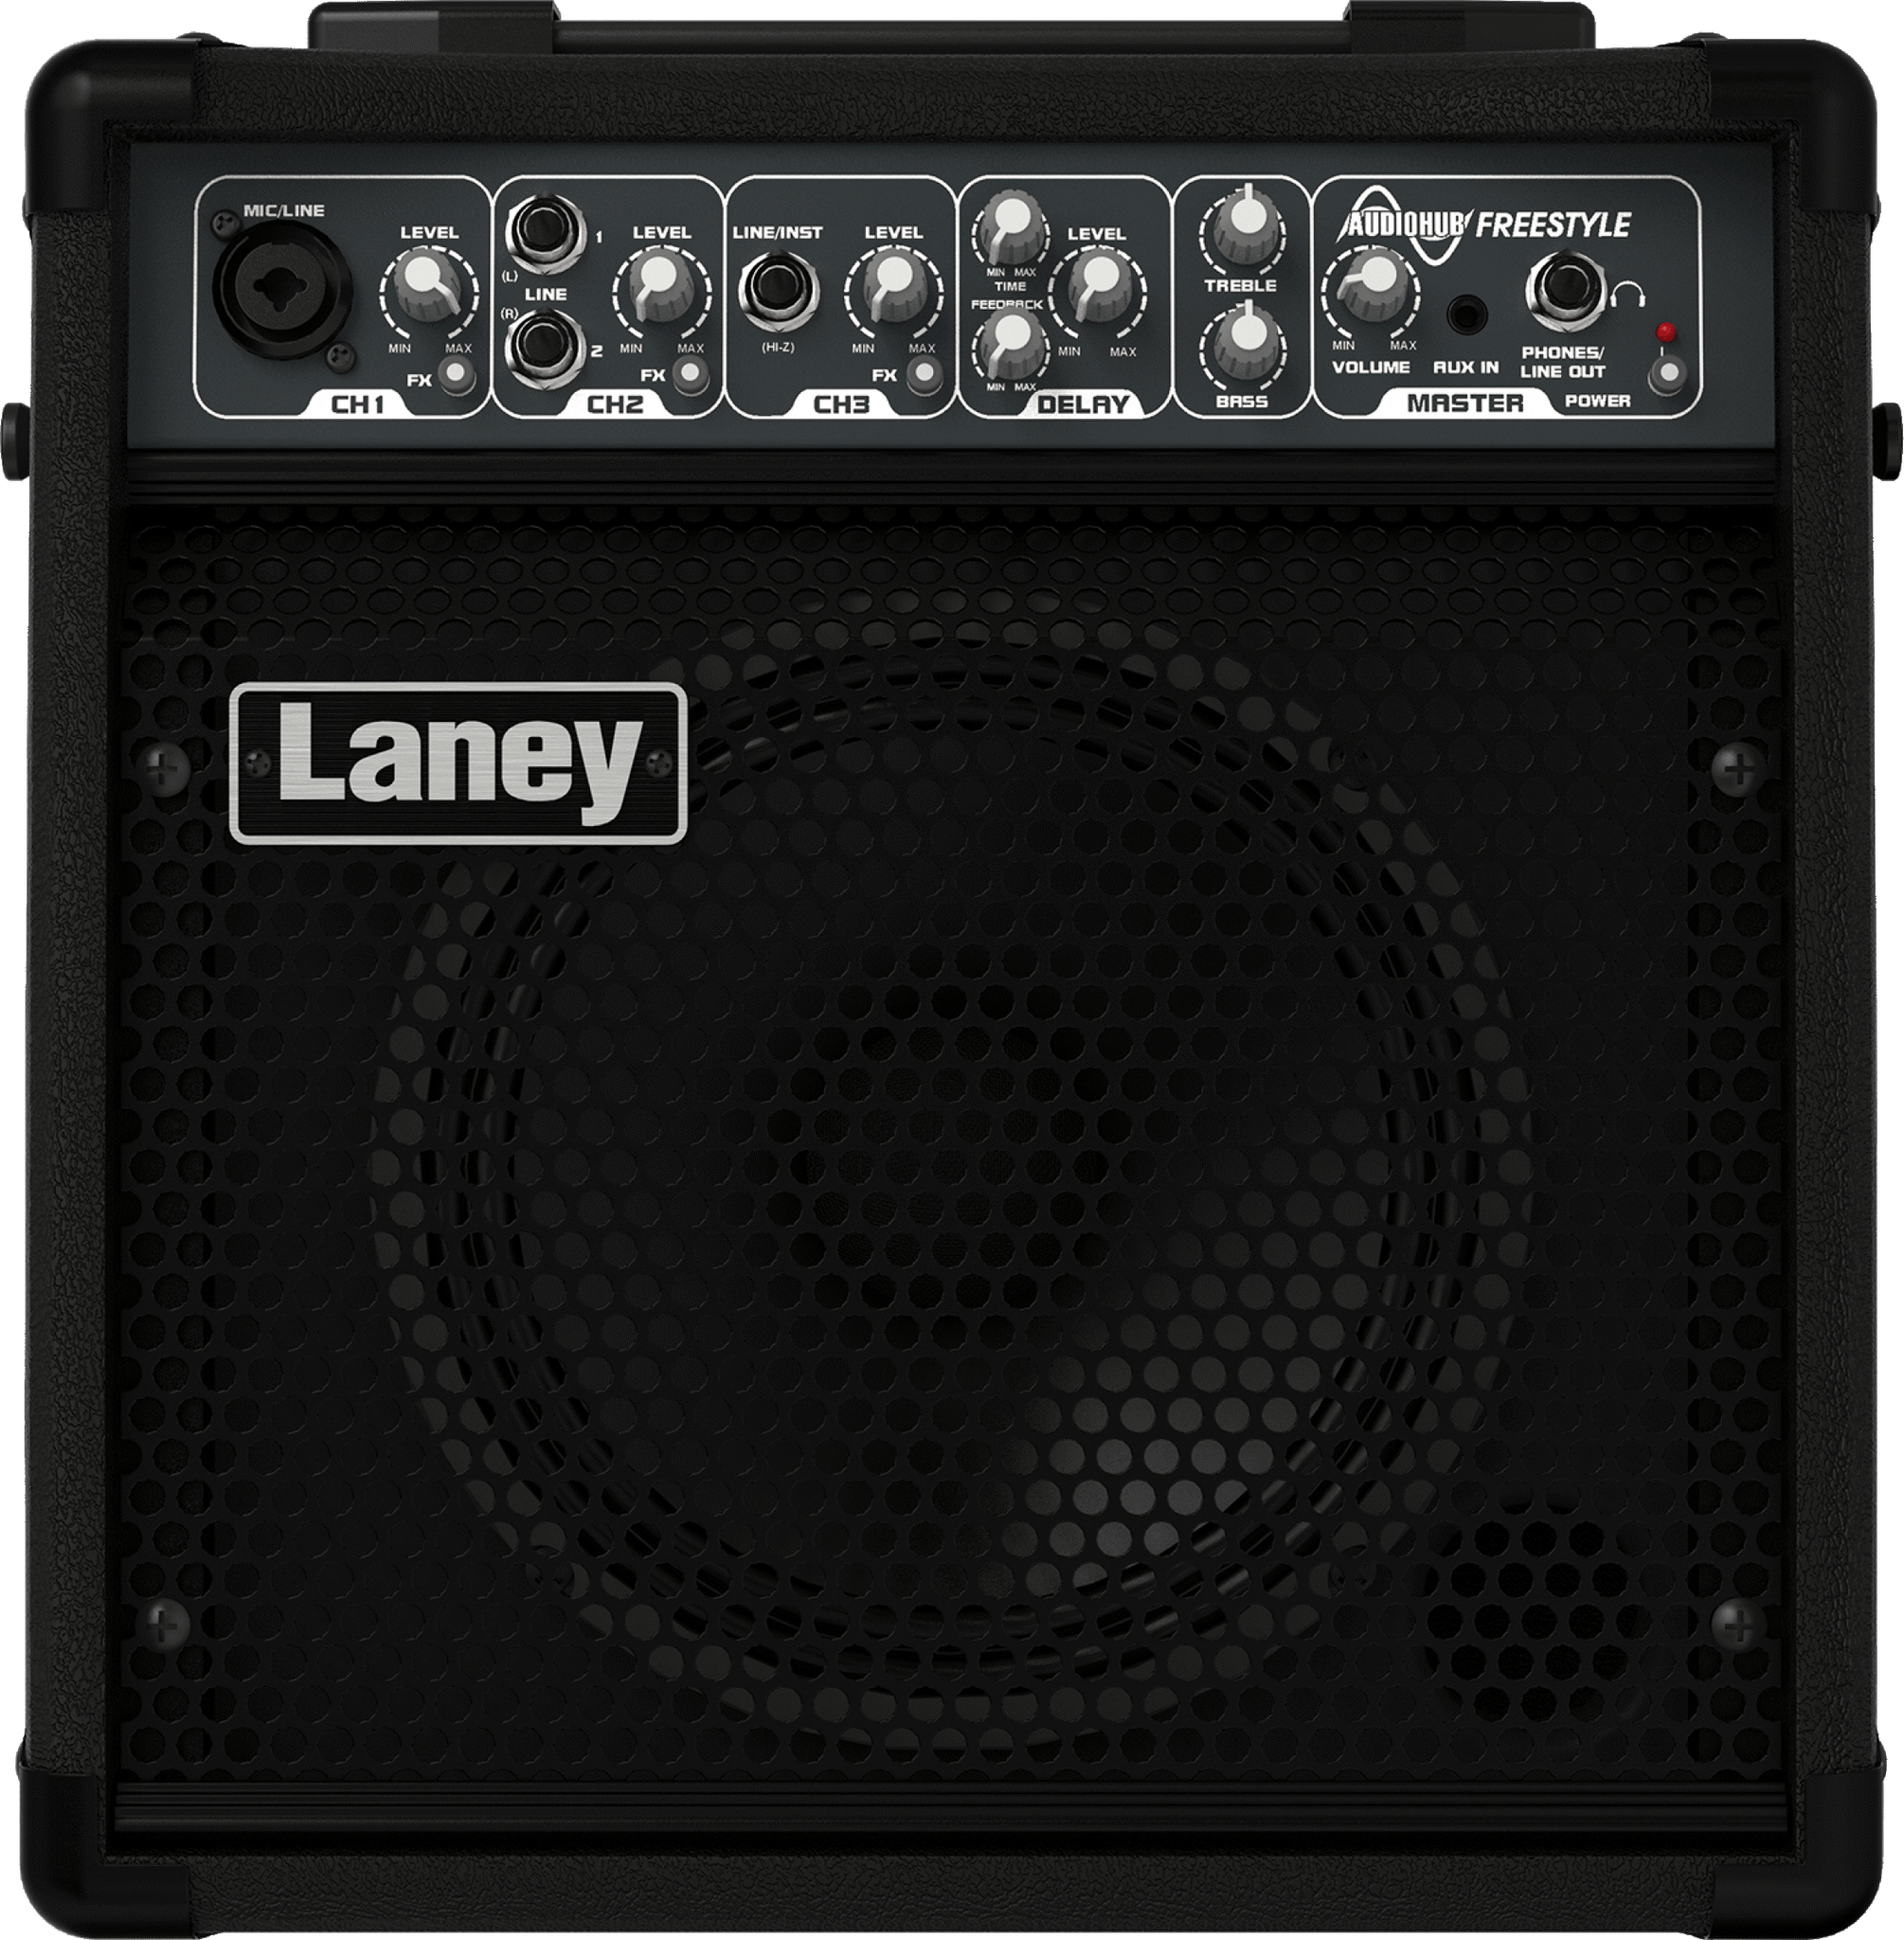 LANEY AH-FREESTYLE KEYBOARD AMPLIFIERS – The Xound